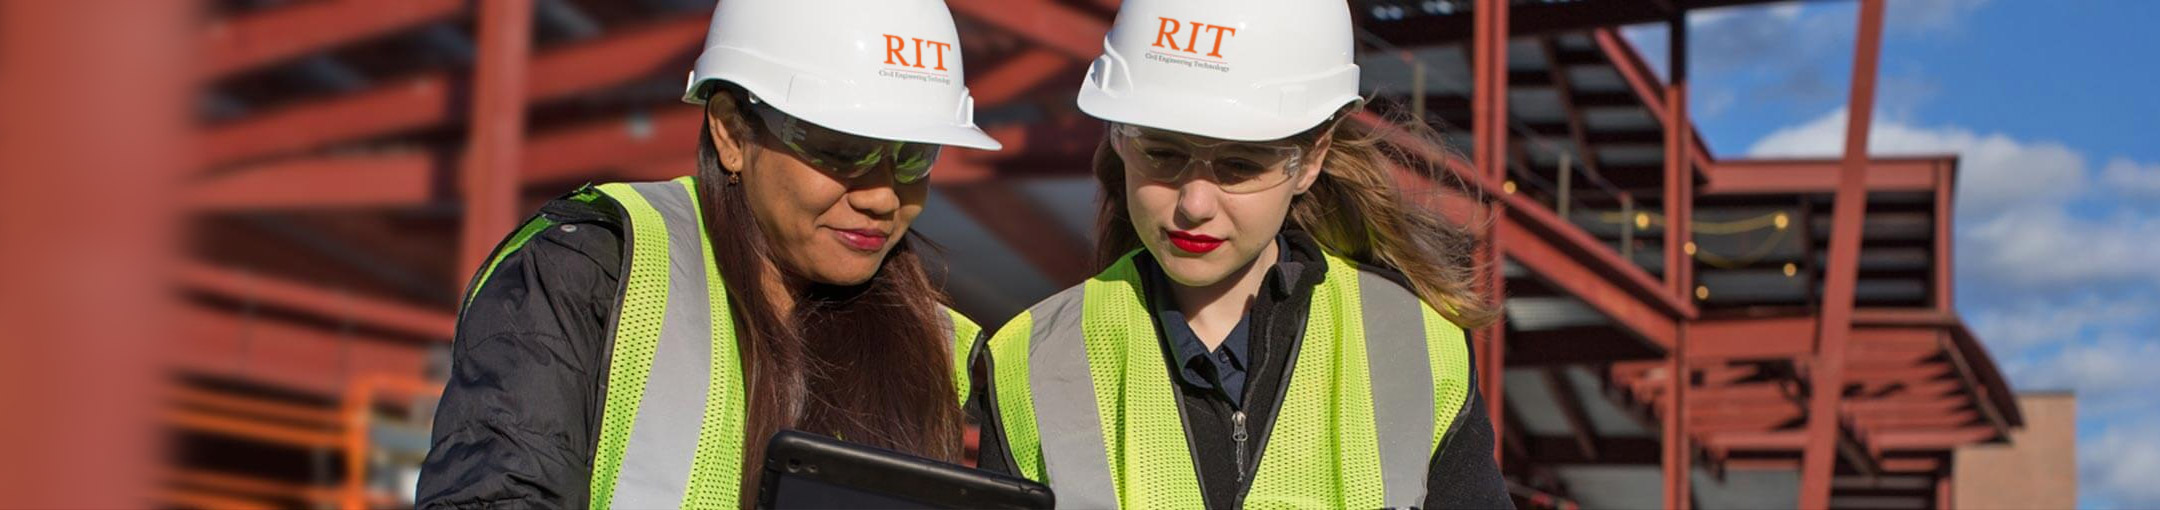 Two people wearing hard hats that say RIT look down at tablet computers. They are standing in from of a construction site.